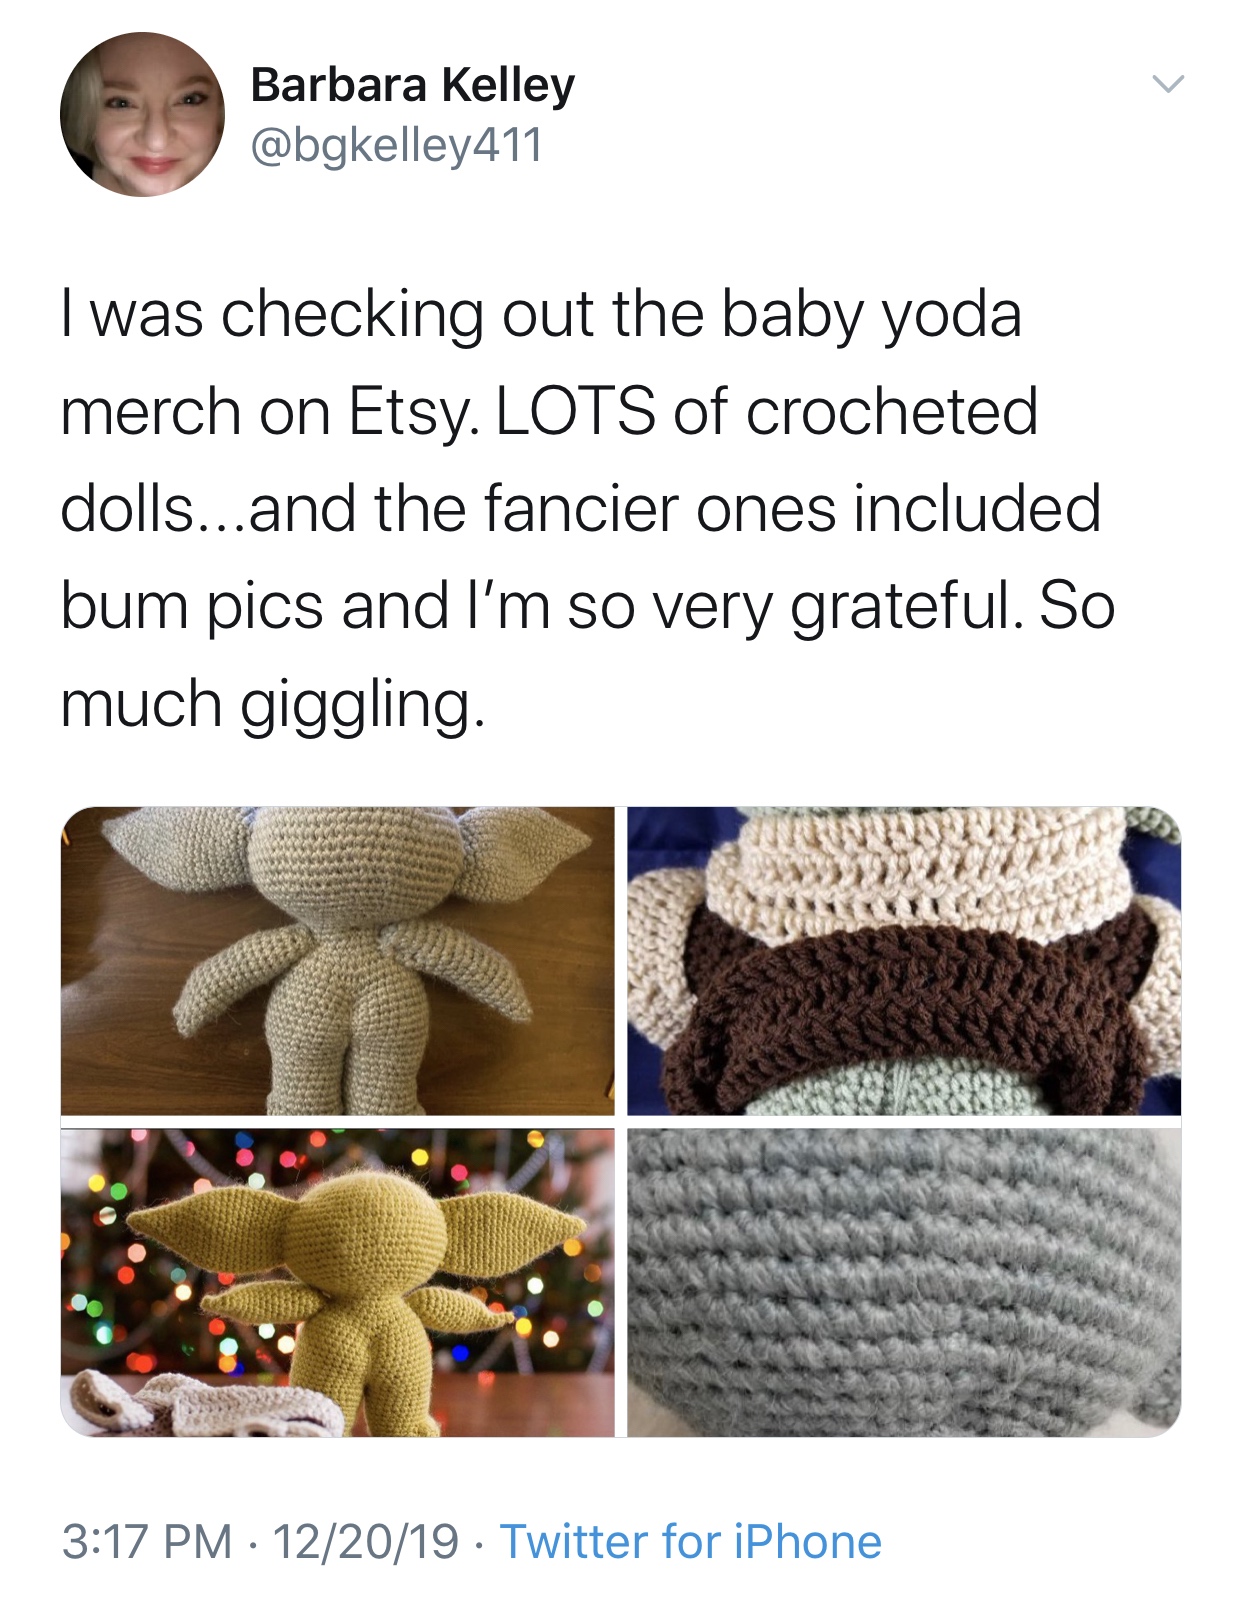 peter tingle meme - Barbara Kelley I was checking out the baby yoda merch on Etsy. Lots of crocheted dolls...and the fancier ones included bum pics and I'm so very grateful. So much giggling. 122019 Twitter for iPhone